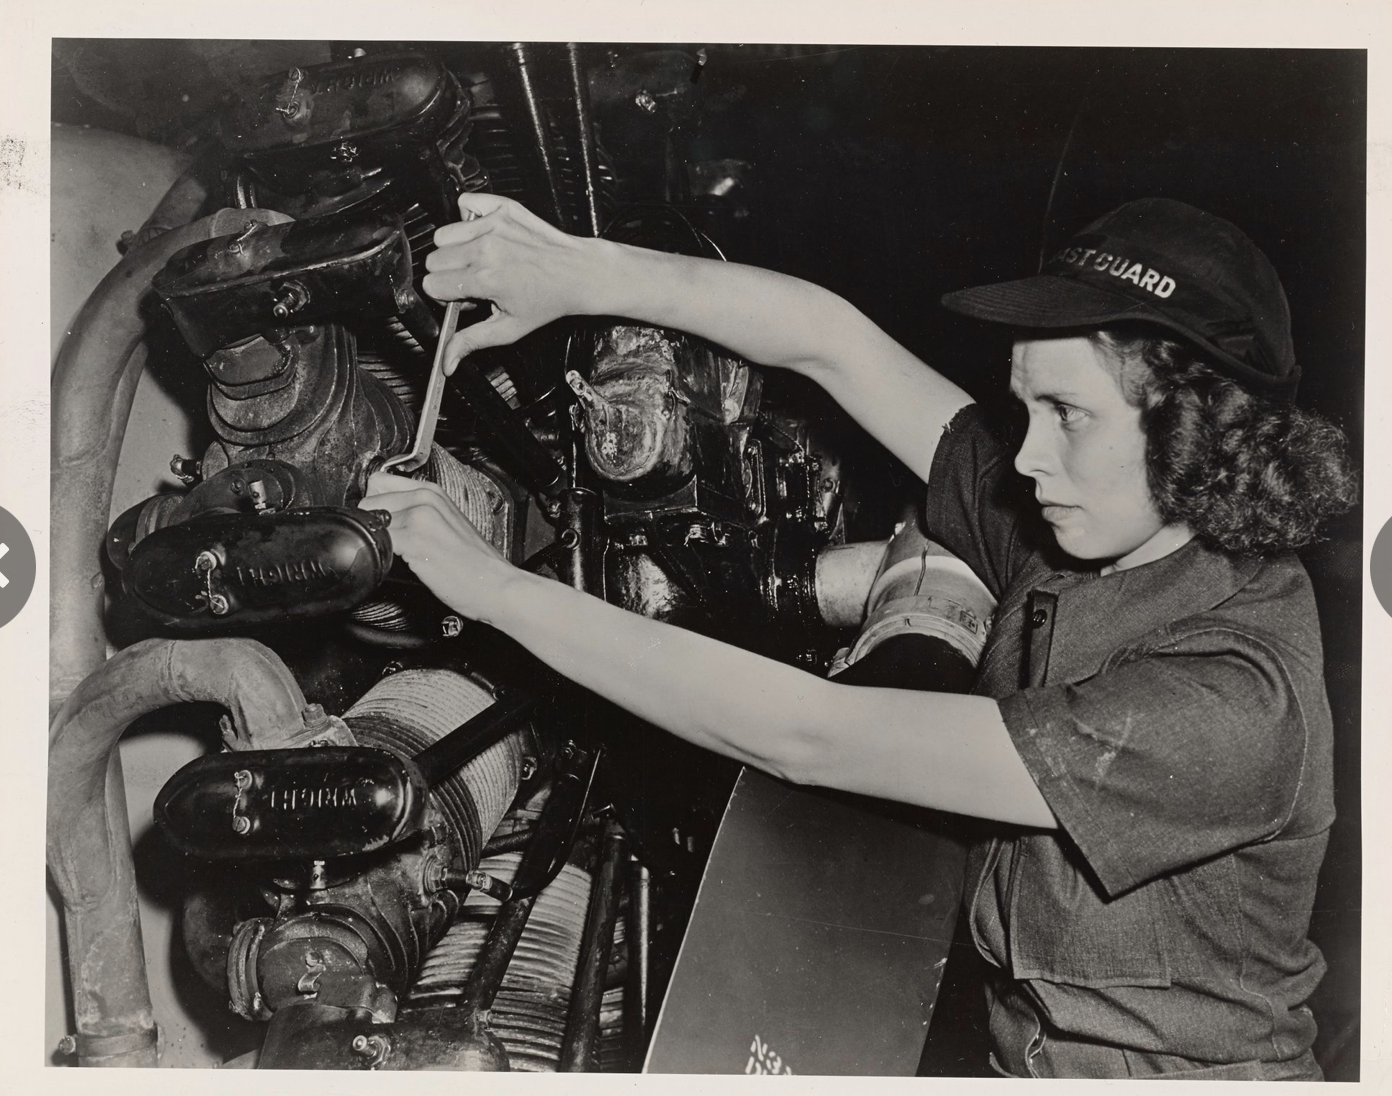 SPAR aviation mechanic Evelyn Doell working on the radial engine of a Coast Guard fixed-wing aircraft during World War II. (National Archives)